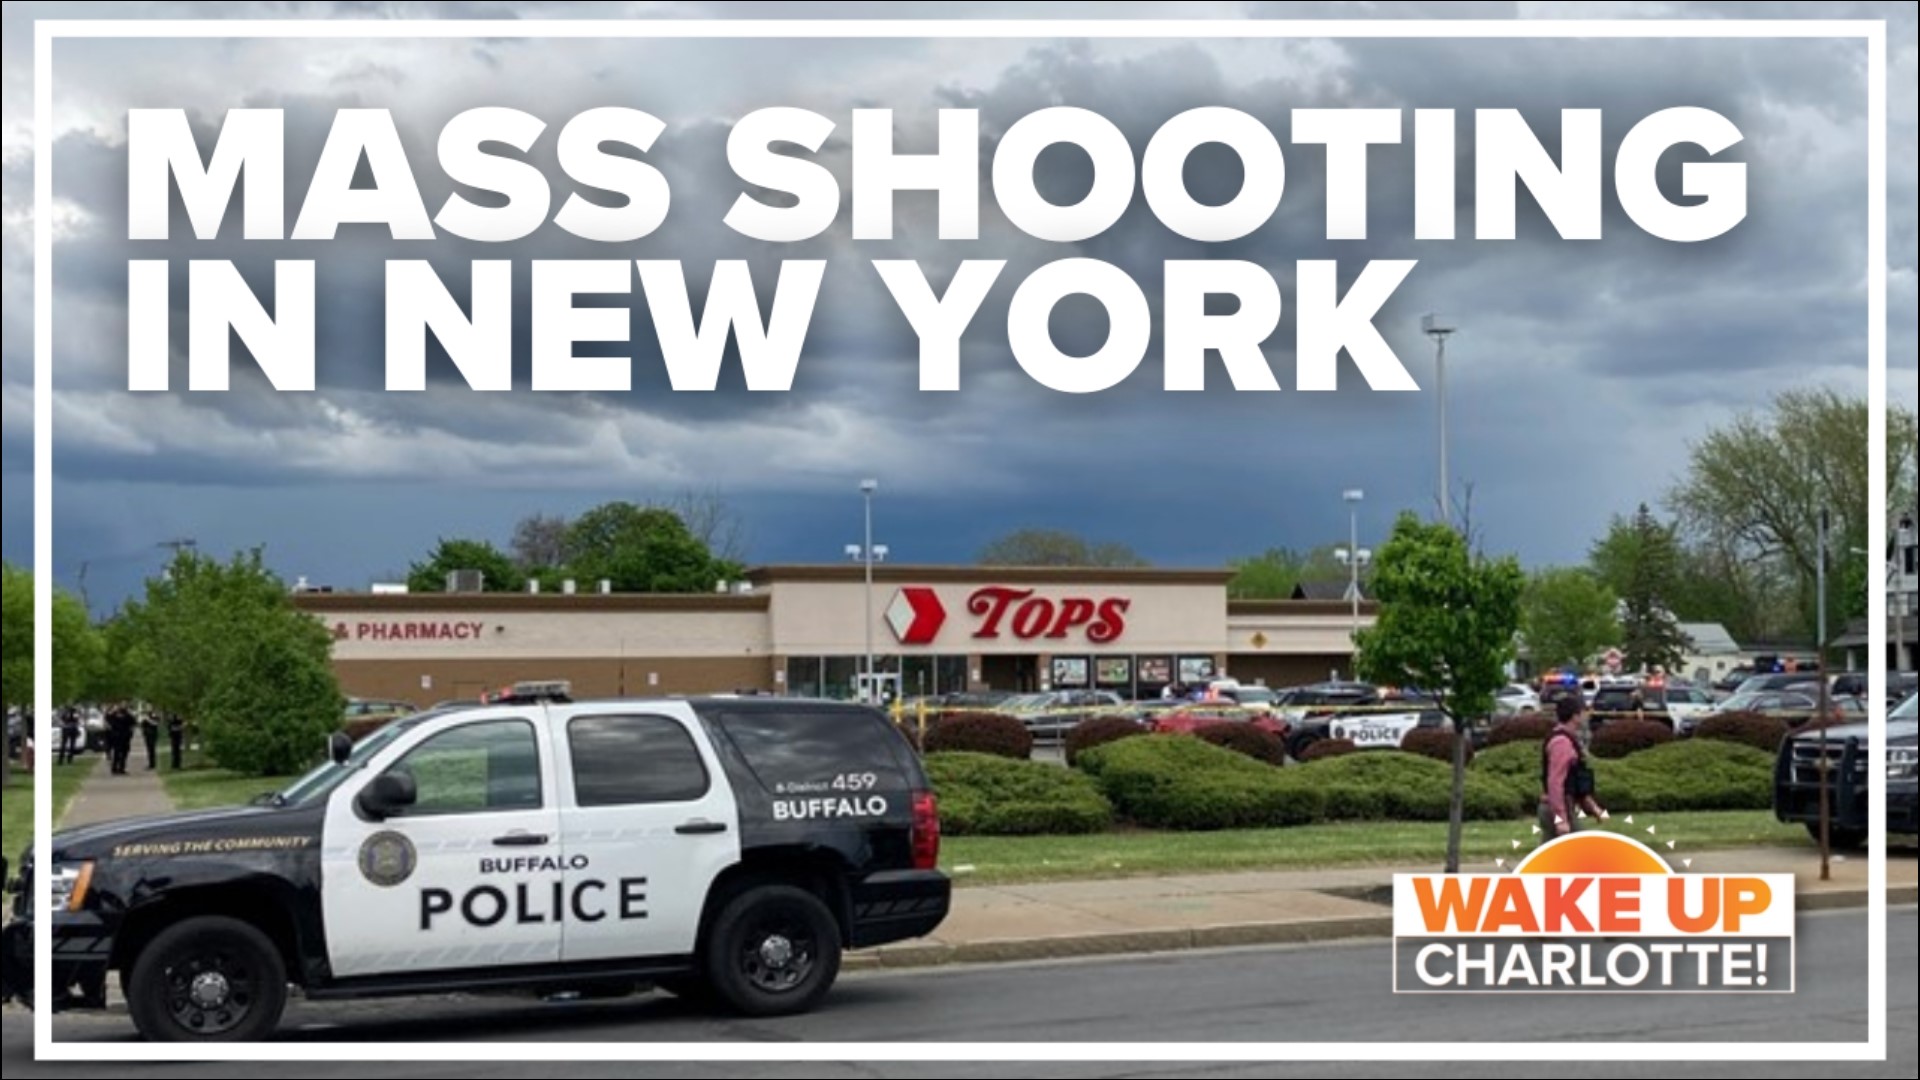 Thirteen people were shot, 10 killed at the Tops Markets grocery store on Jefferson Avenue in Buffalo Saturday afternoon.